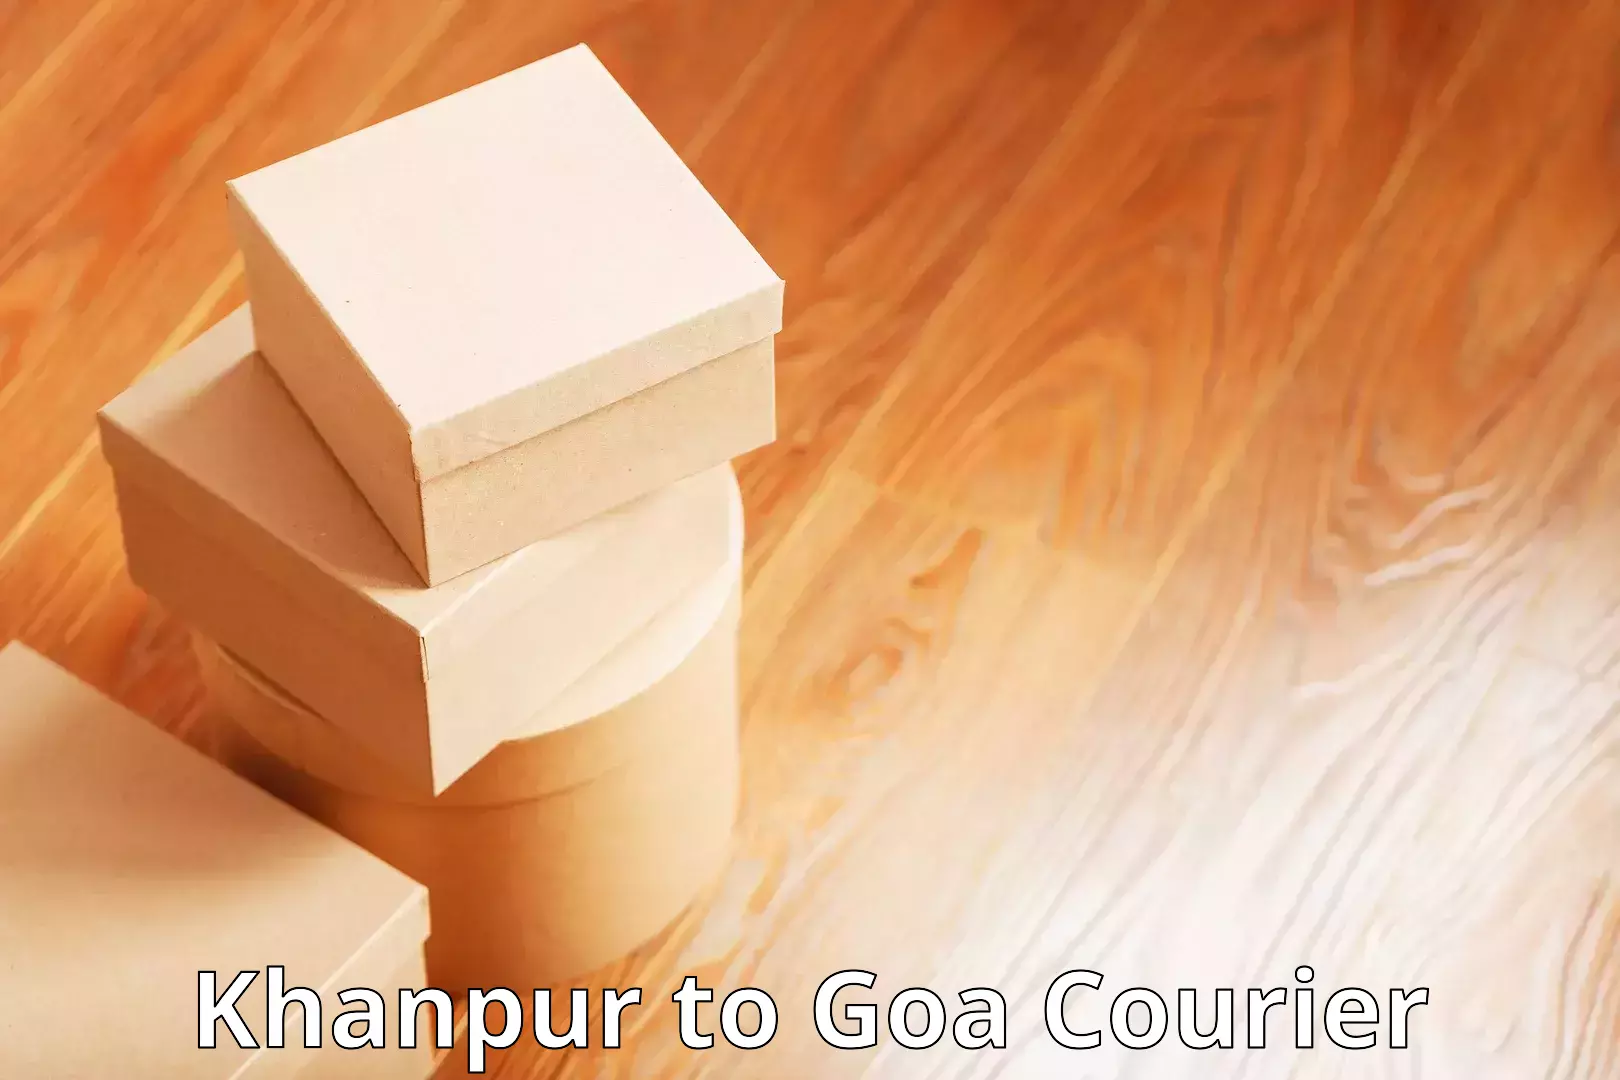 Next-generation courier services Khanpur to Panaji